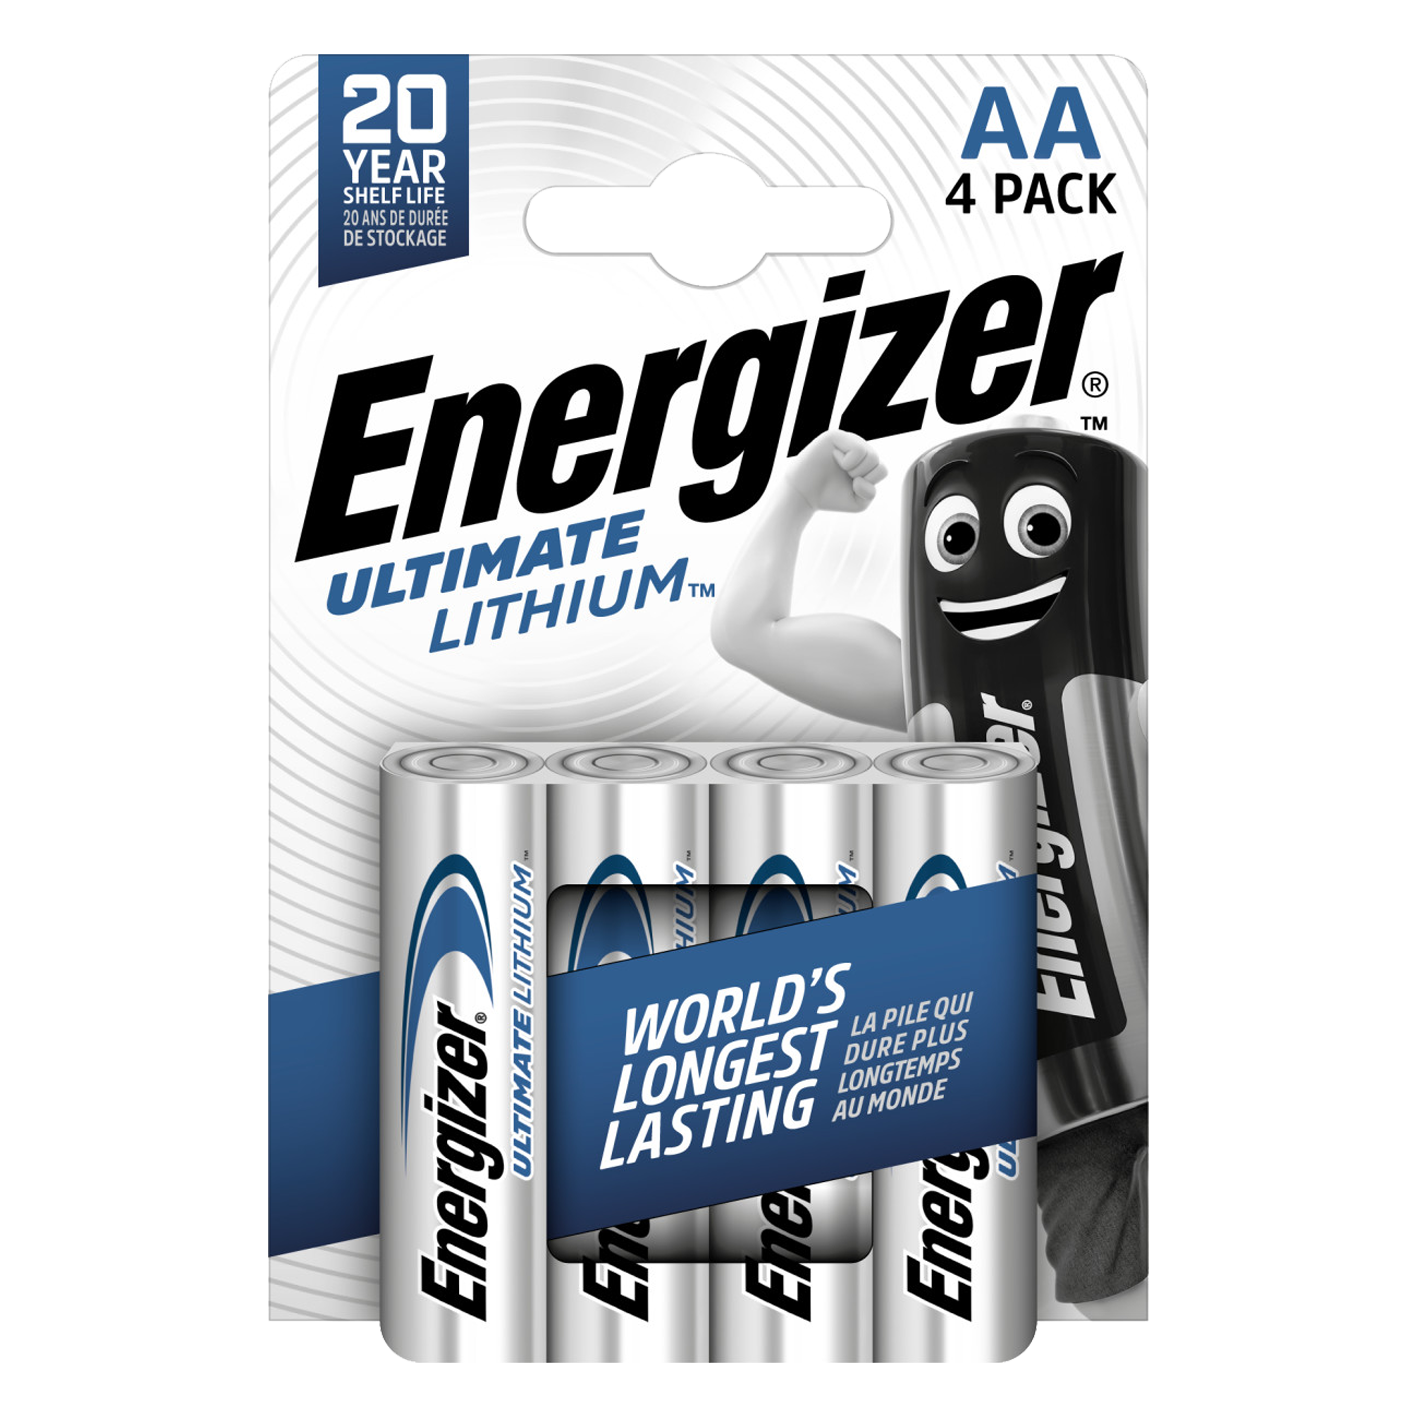 Energizer AA Ultimate Lithium, Pack of 4